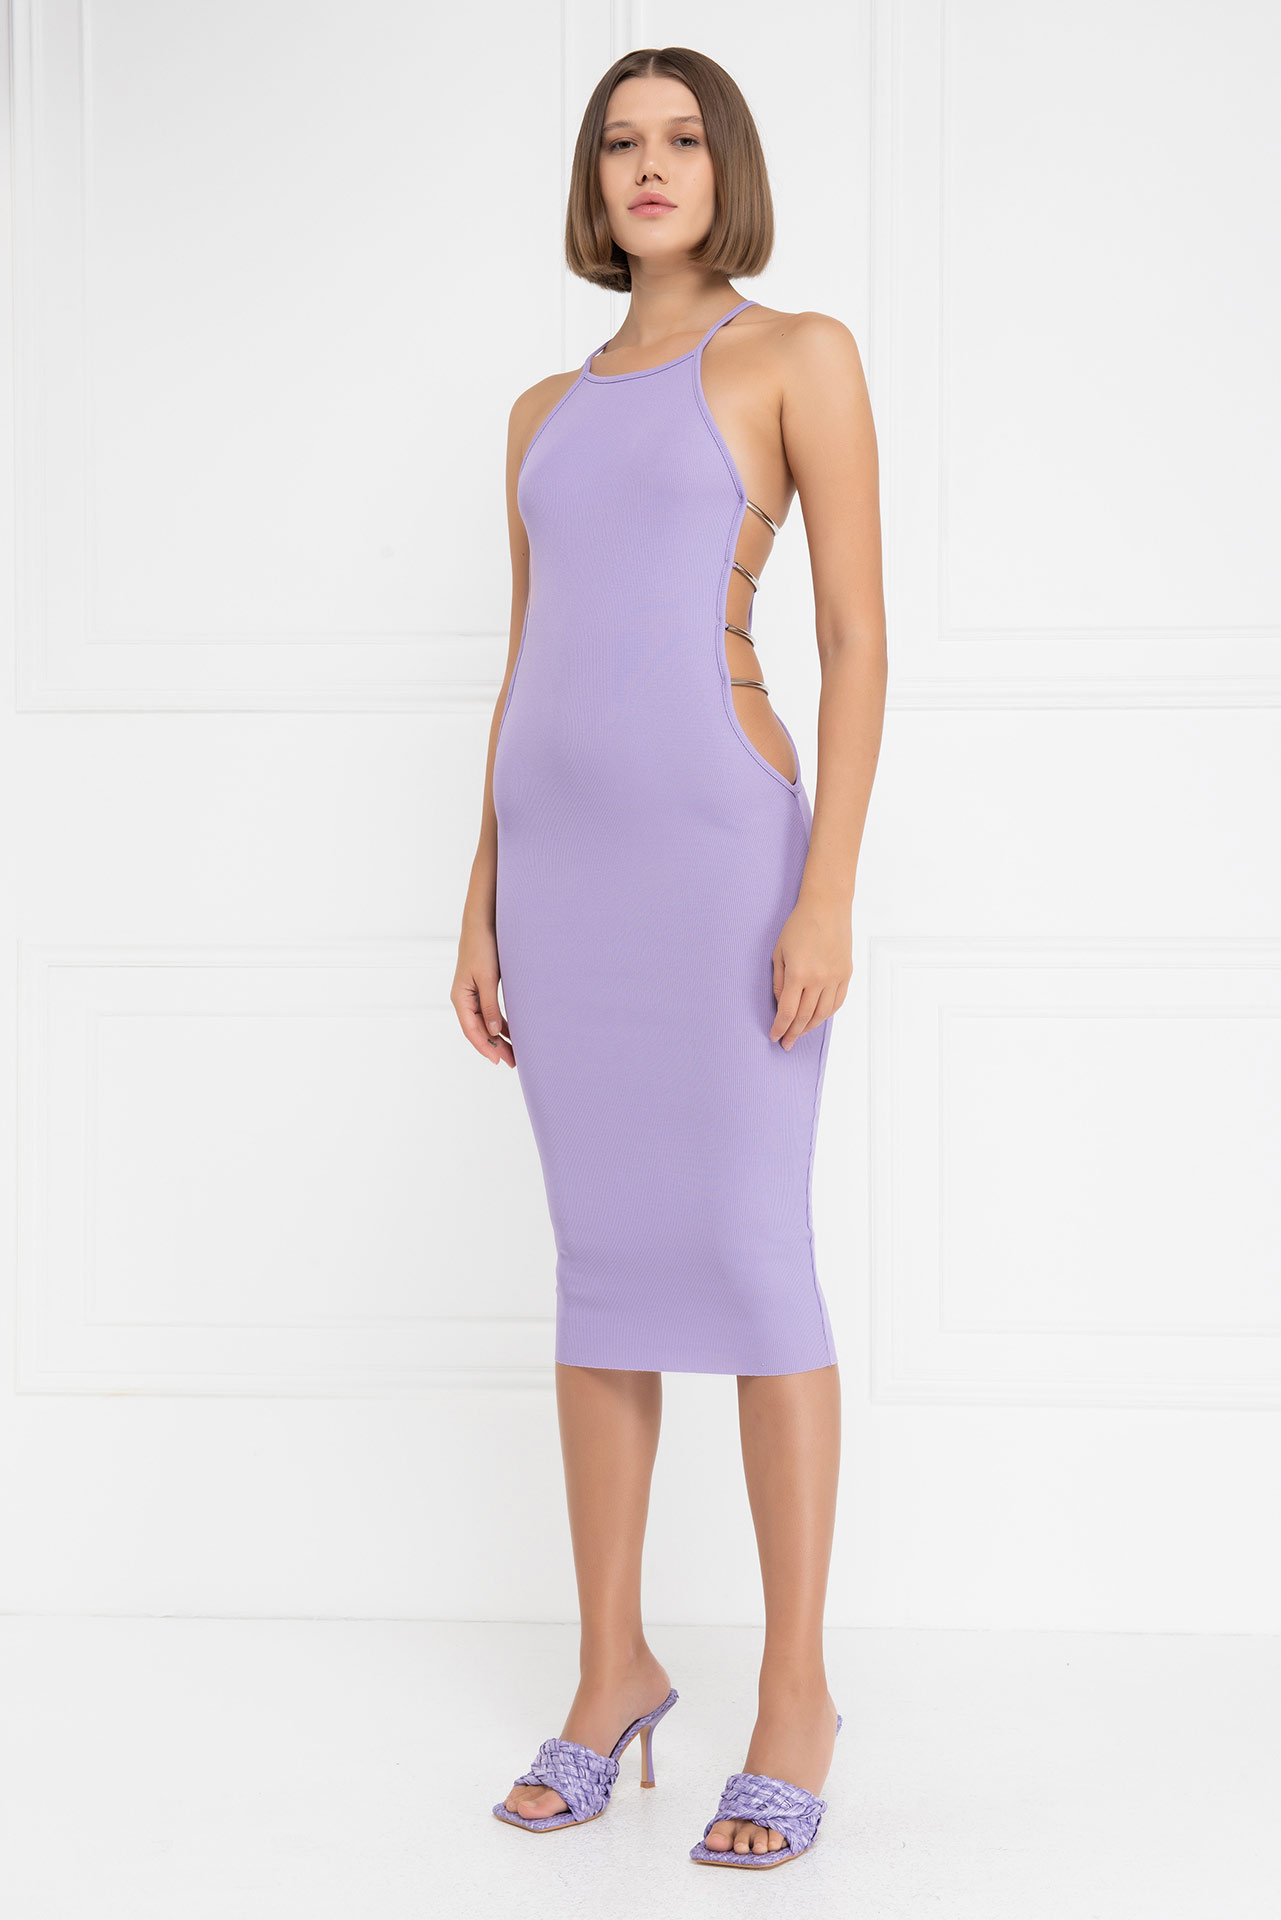 Ladder Cut Out New Lilac Cami Dress